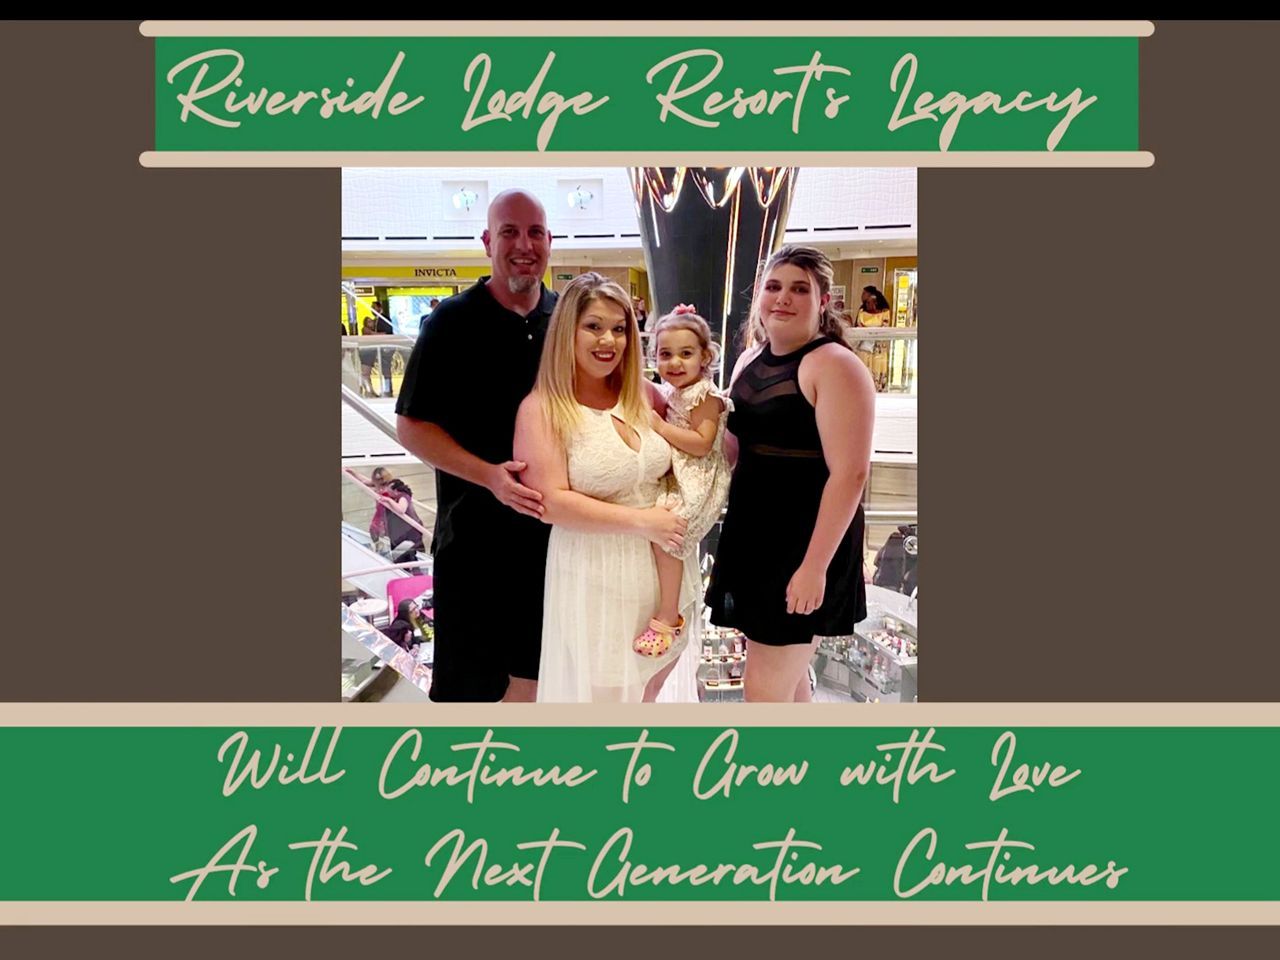 riverside lodge resort 's legacy will continue to grow with love as the next generation continues